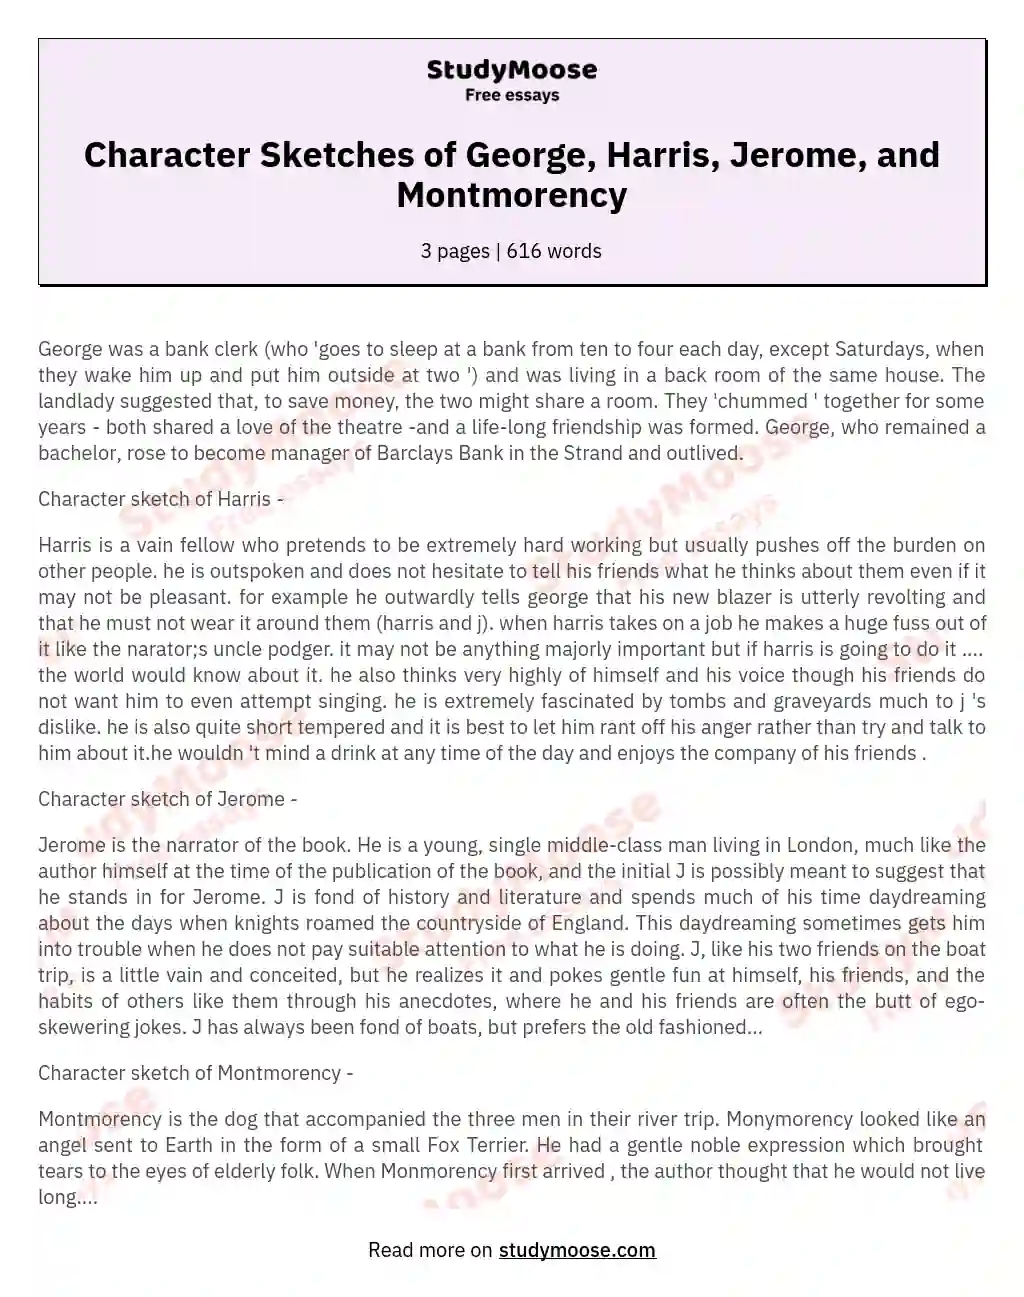 Character Sketches of George, Harris, Jerome, and Montmorency essay